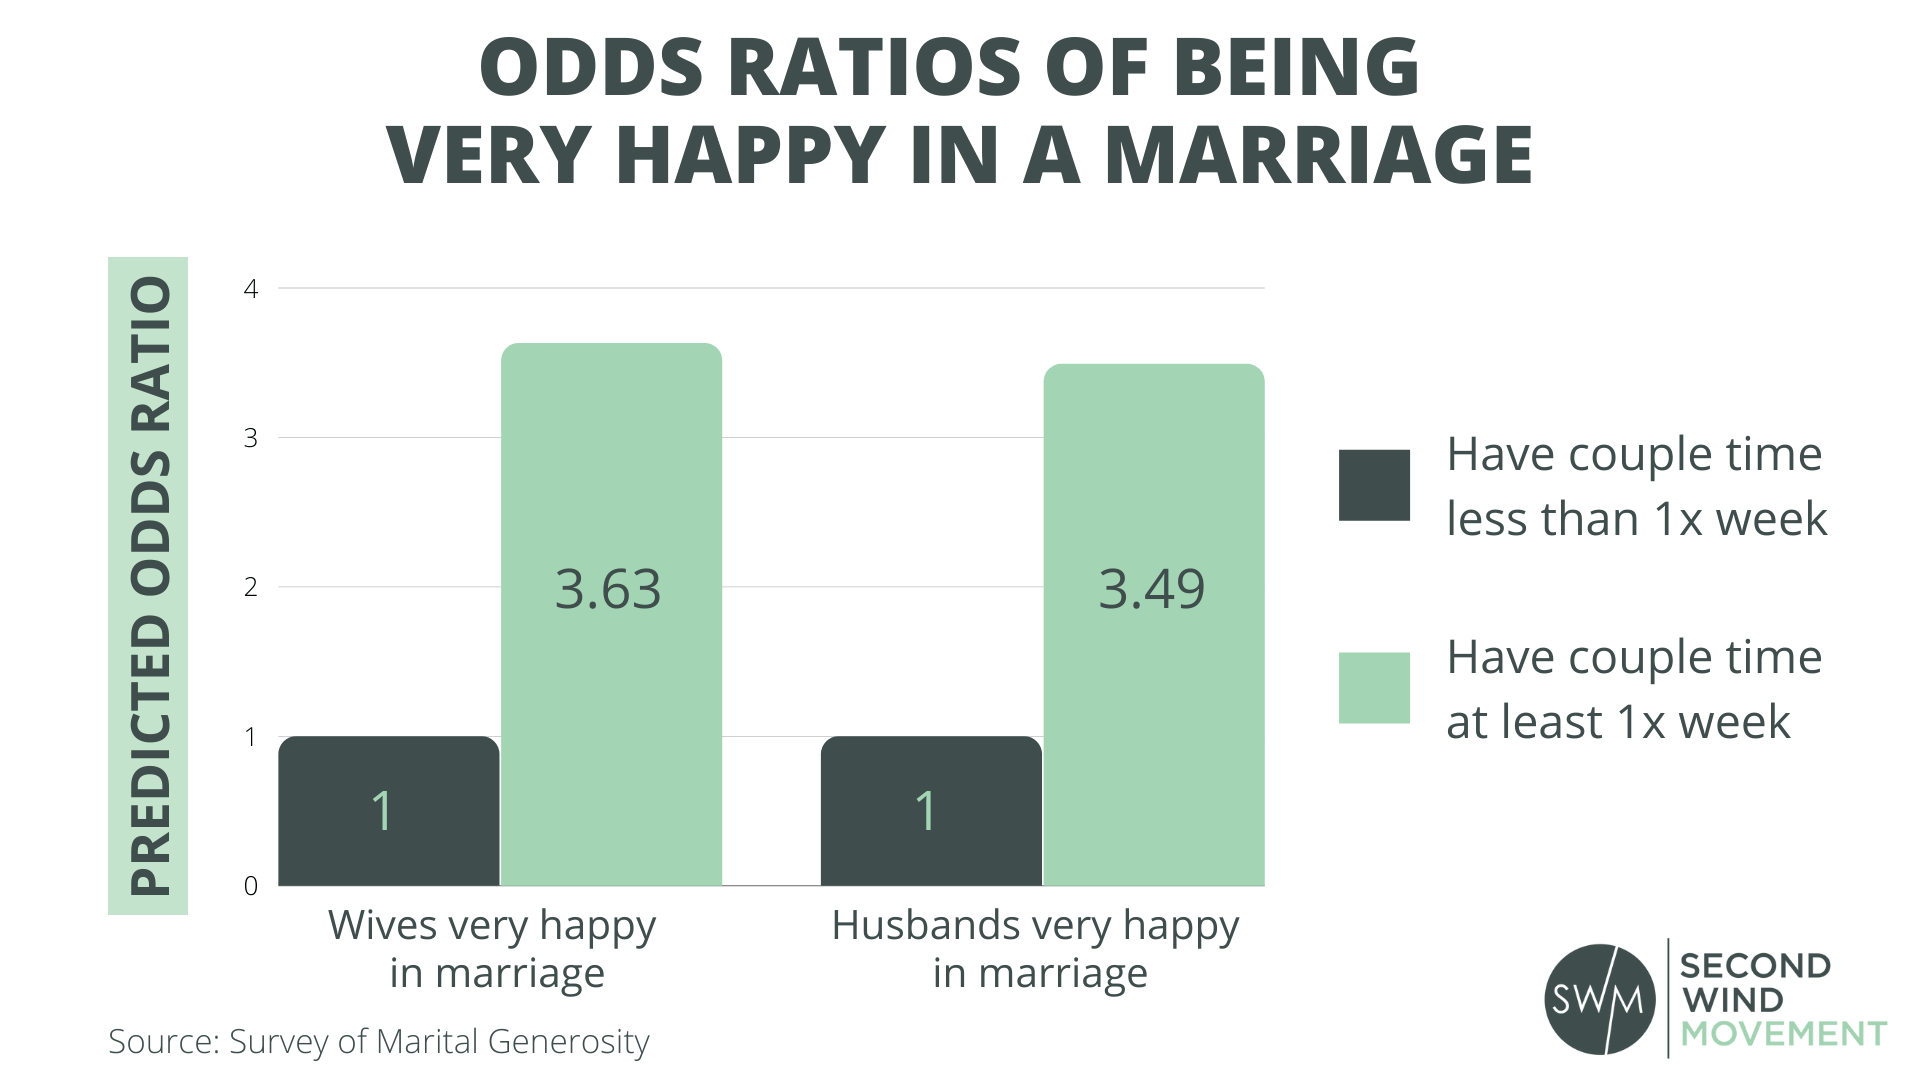 the odd ratios of being very happy in a marriage and its correlation to couple time